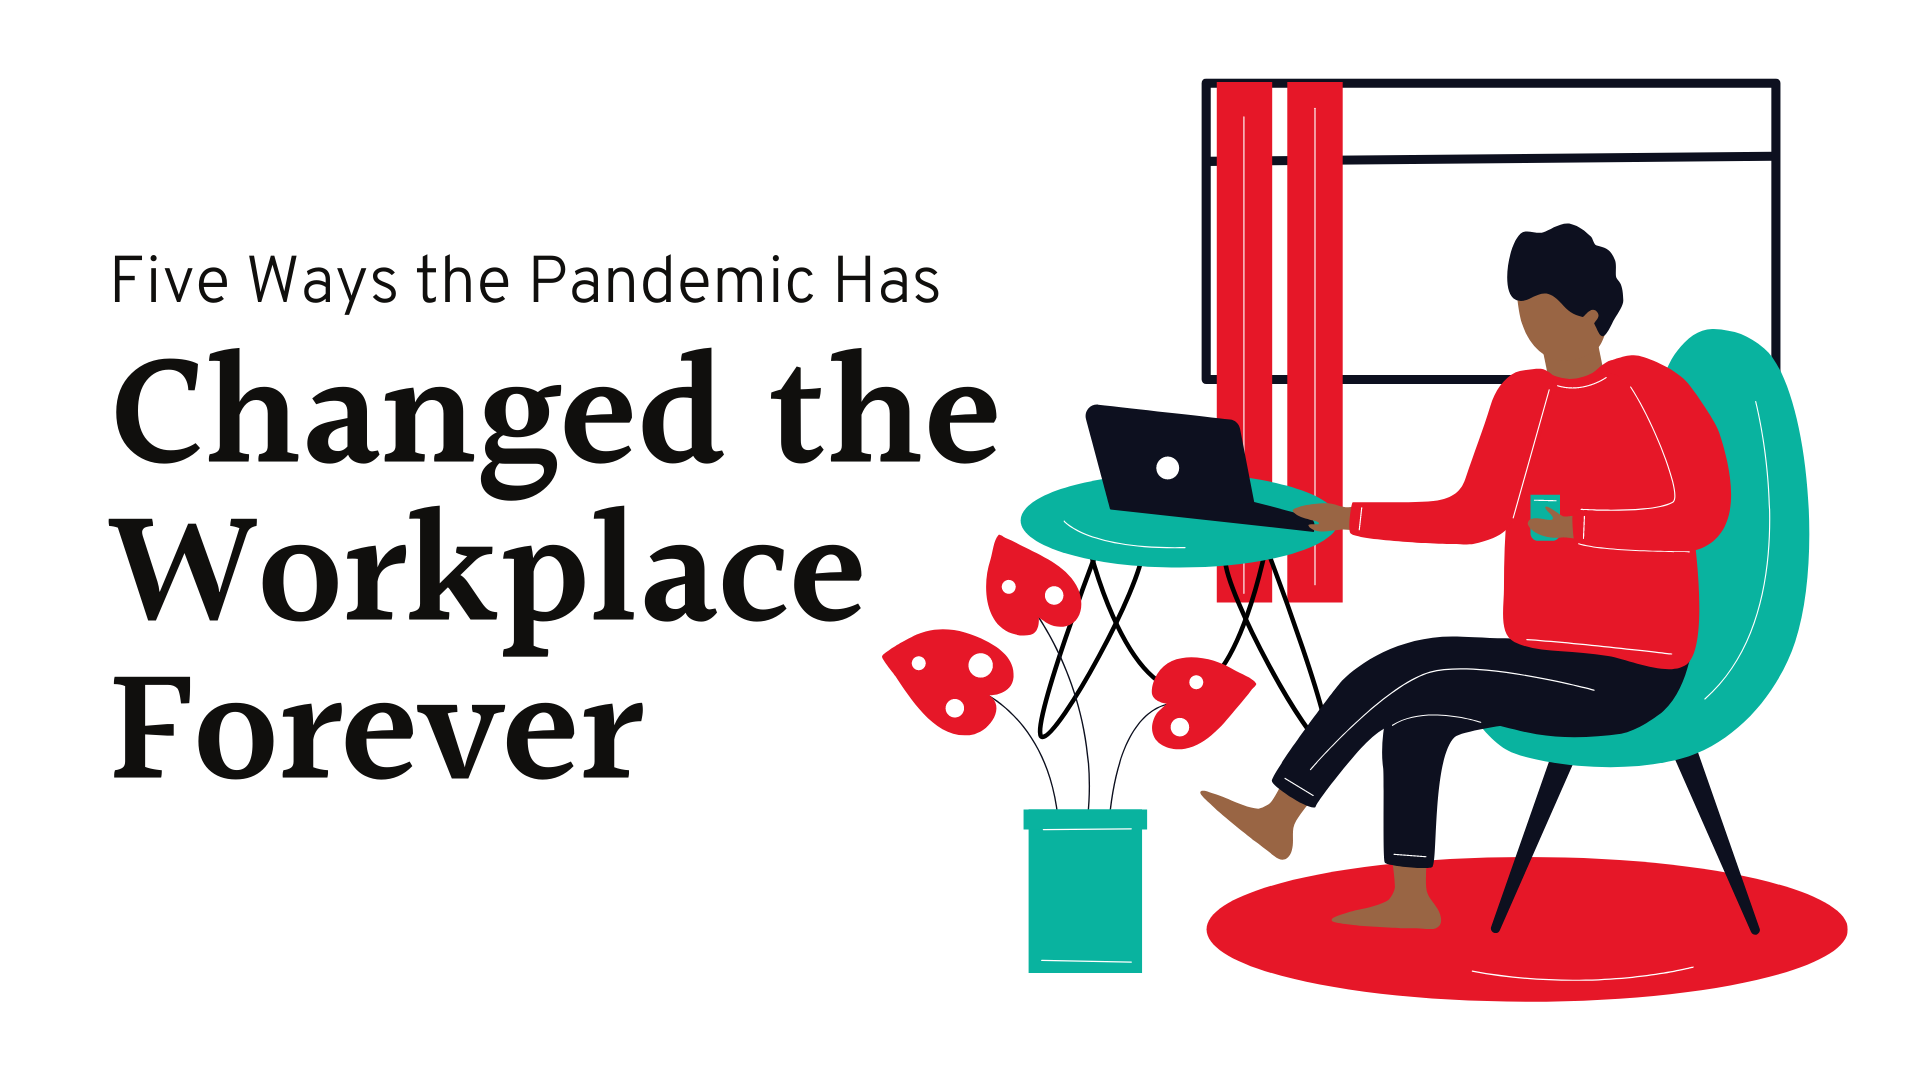 Five Ways The Pandemic Has Changed he Workplace Forever, COVID-19, COVID-19 workplace, pandemic changes, new normal, 2021 business, 2021 lockdown, work from home, coronavirus, pandemic ecommerce, covid, workplace , workplace wellness, changed the workplace